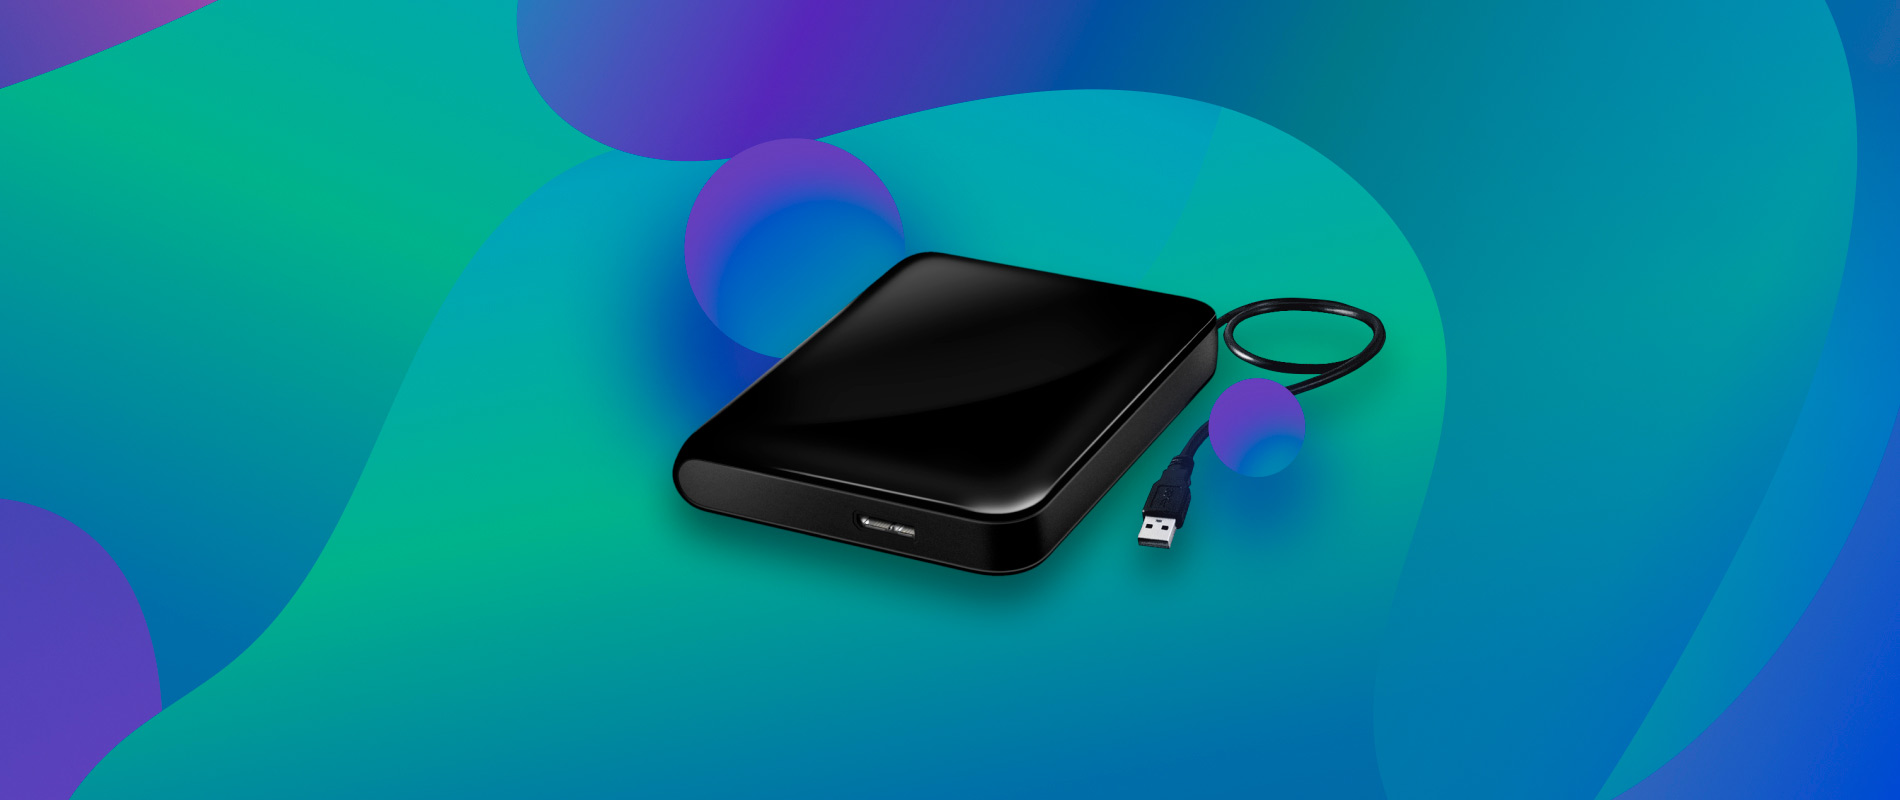 external hard drive recovery android